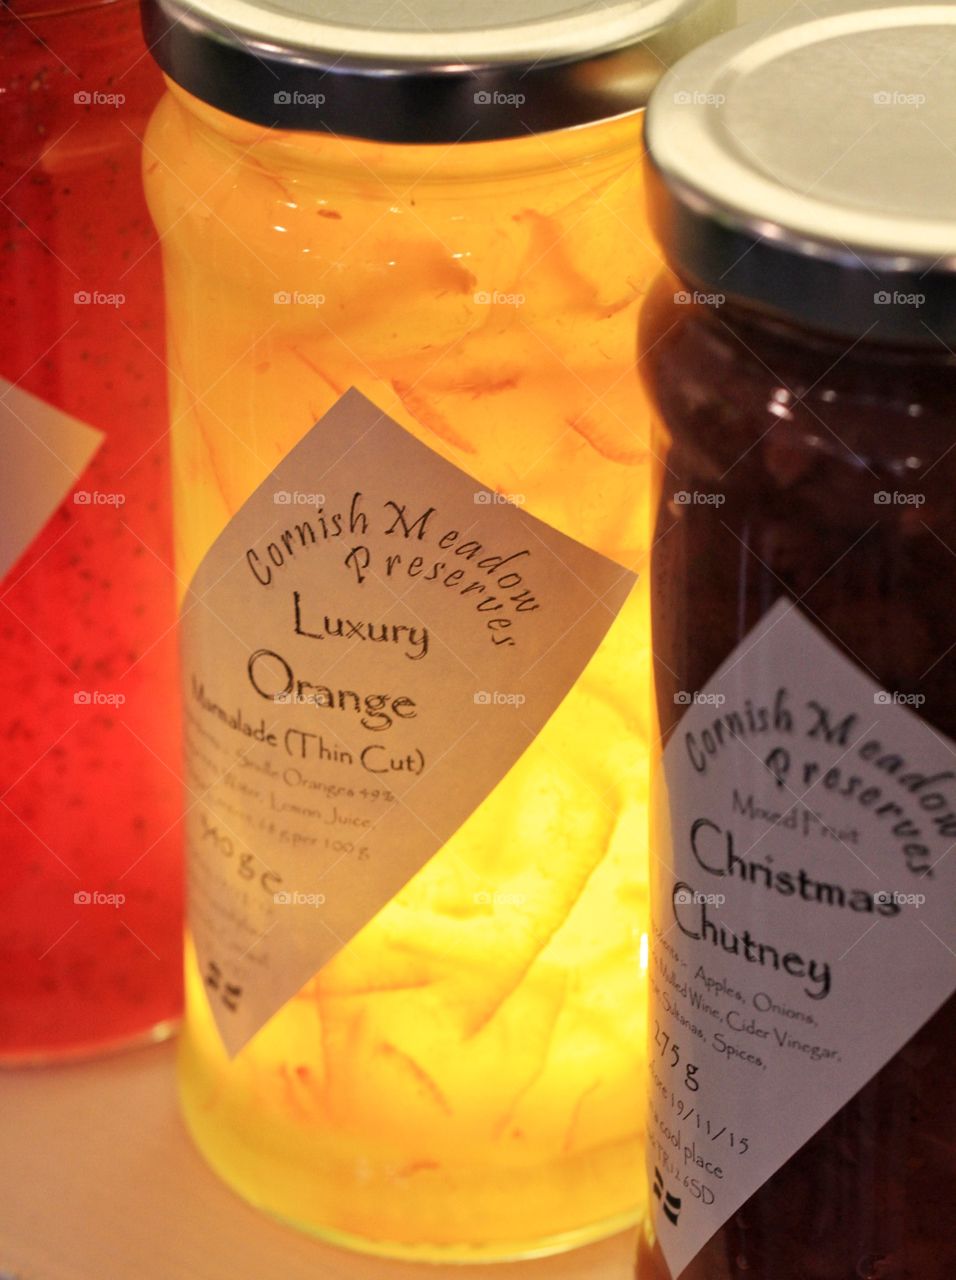 Luminous Marmalade. A jar of marmalade with a glow from artificial light sitting on the store shelf amongst a row of preserves.